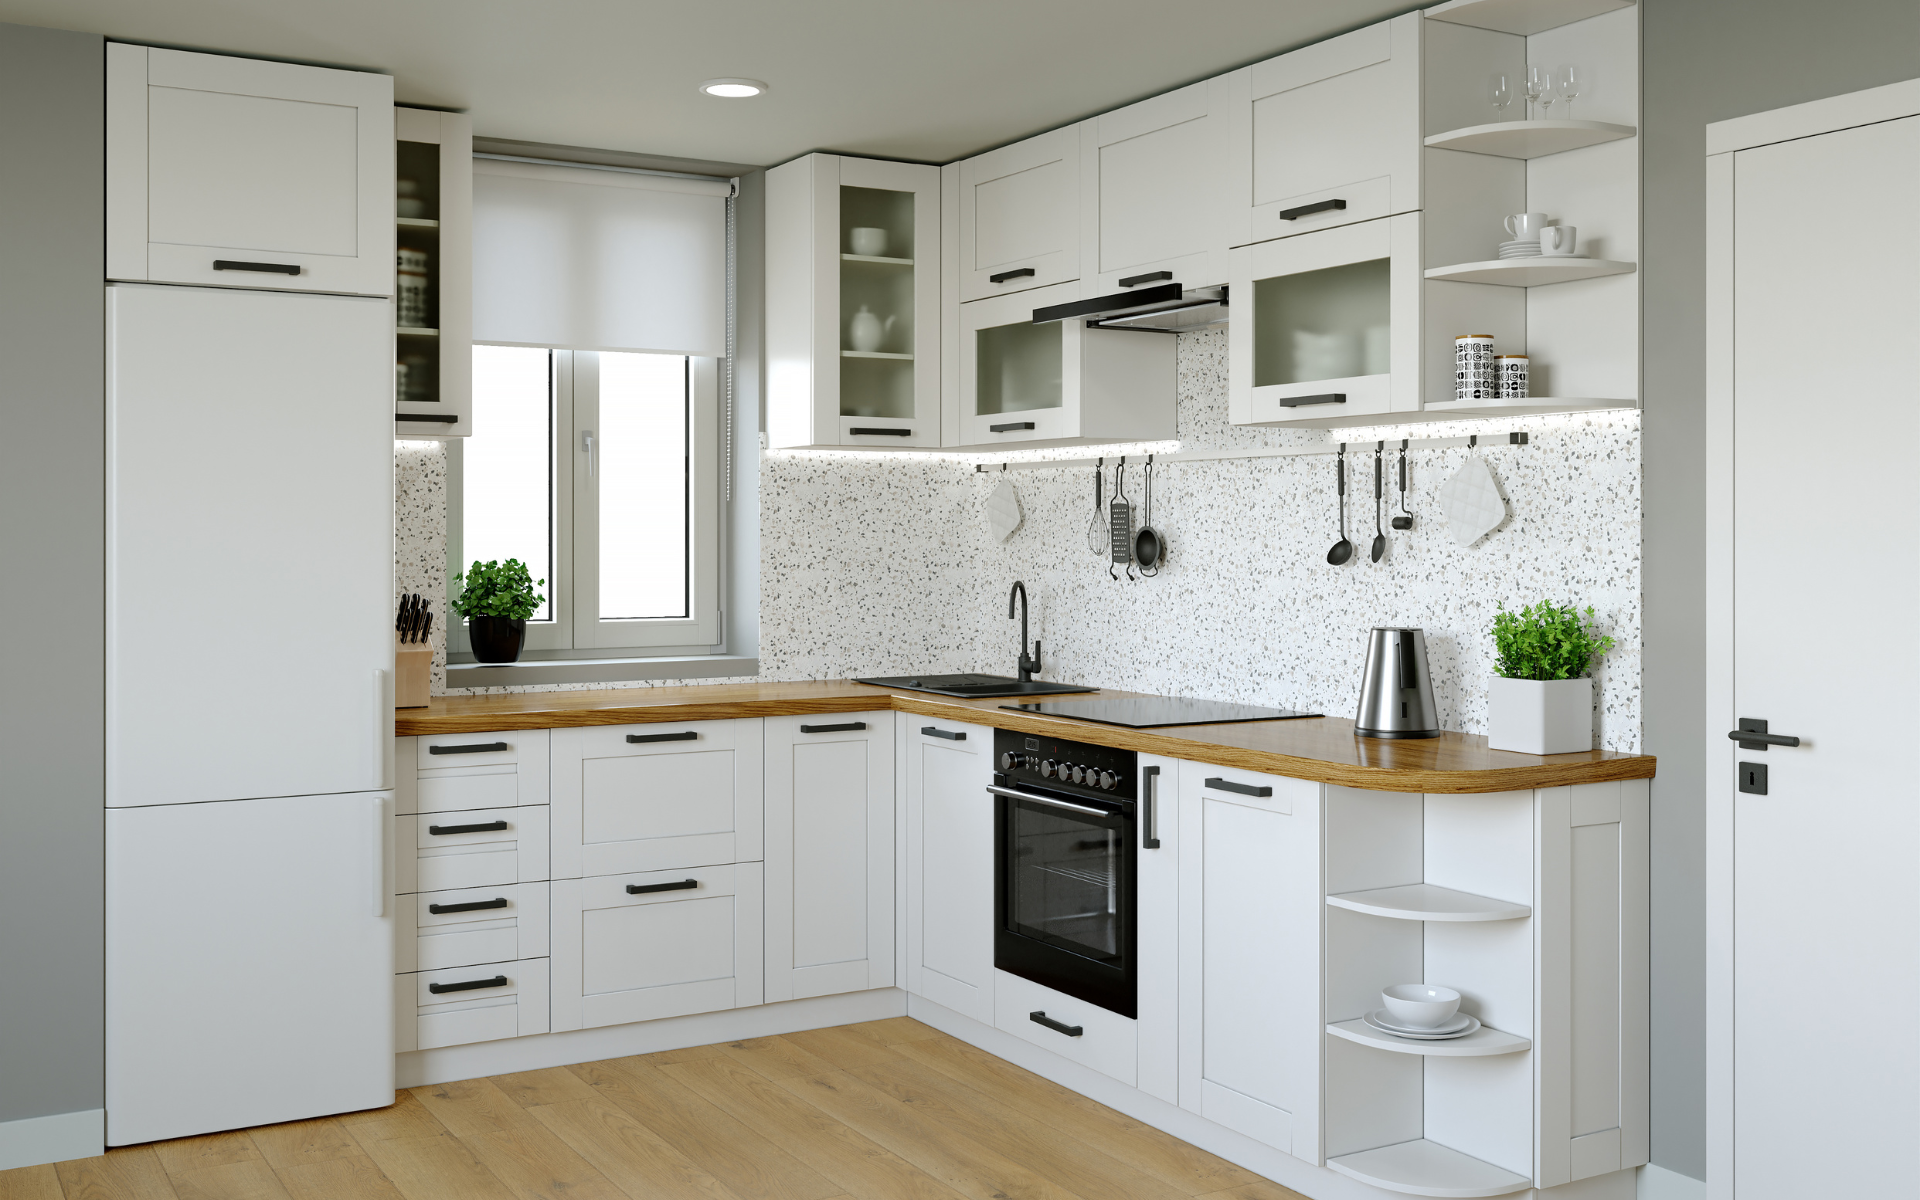 Small L-type kitchen with white shaker cabinets